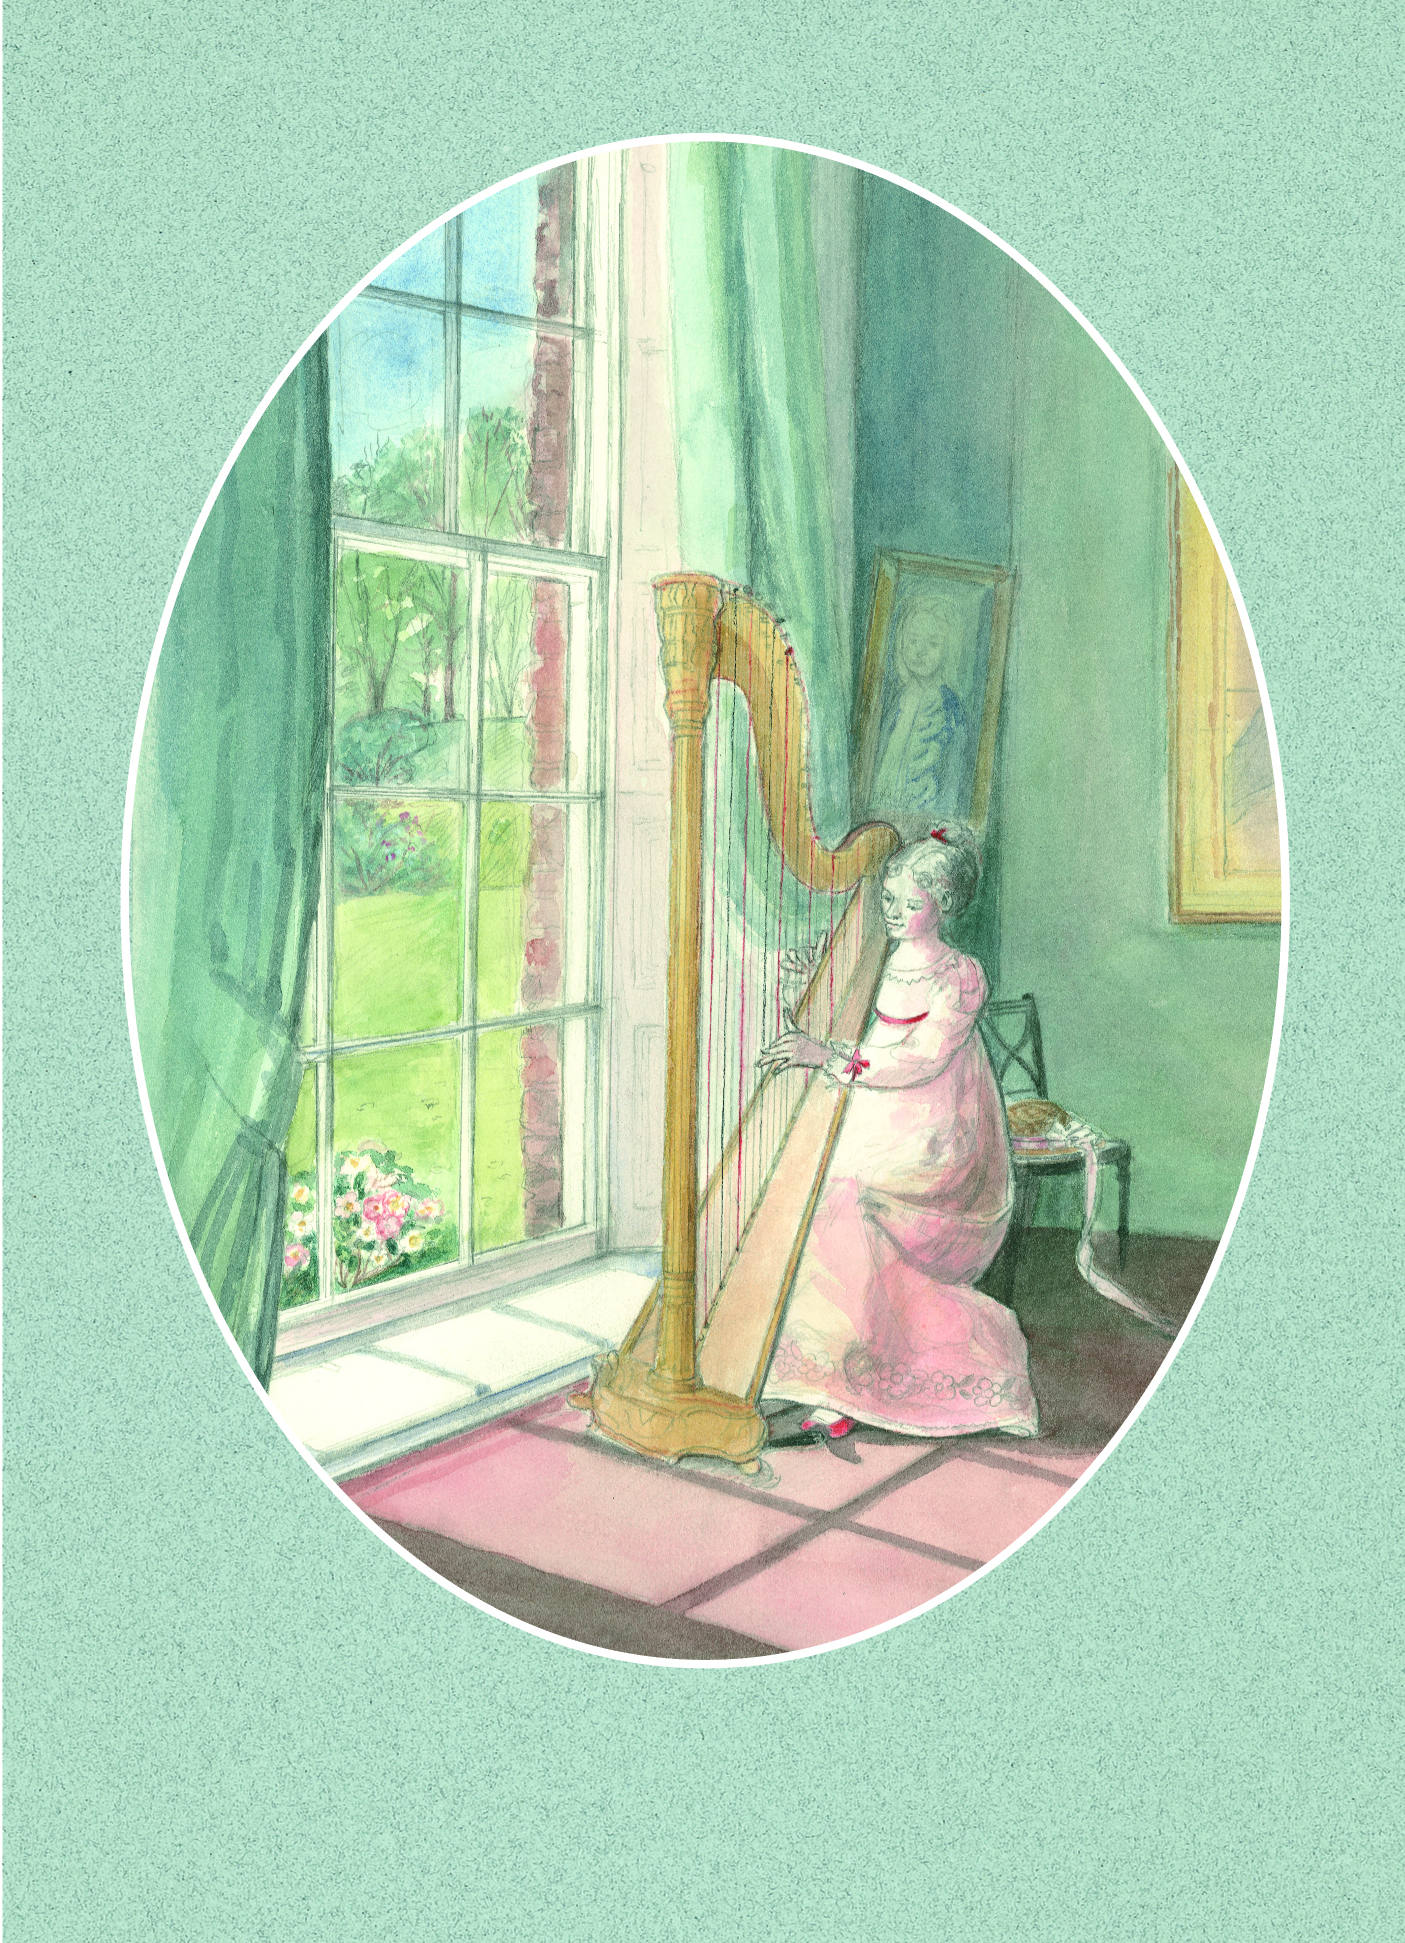 A young woman playing the harp by the window - Jane Austen card on sale at Winchester Cathedral gift shop.